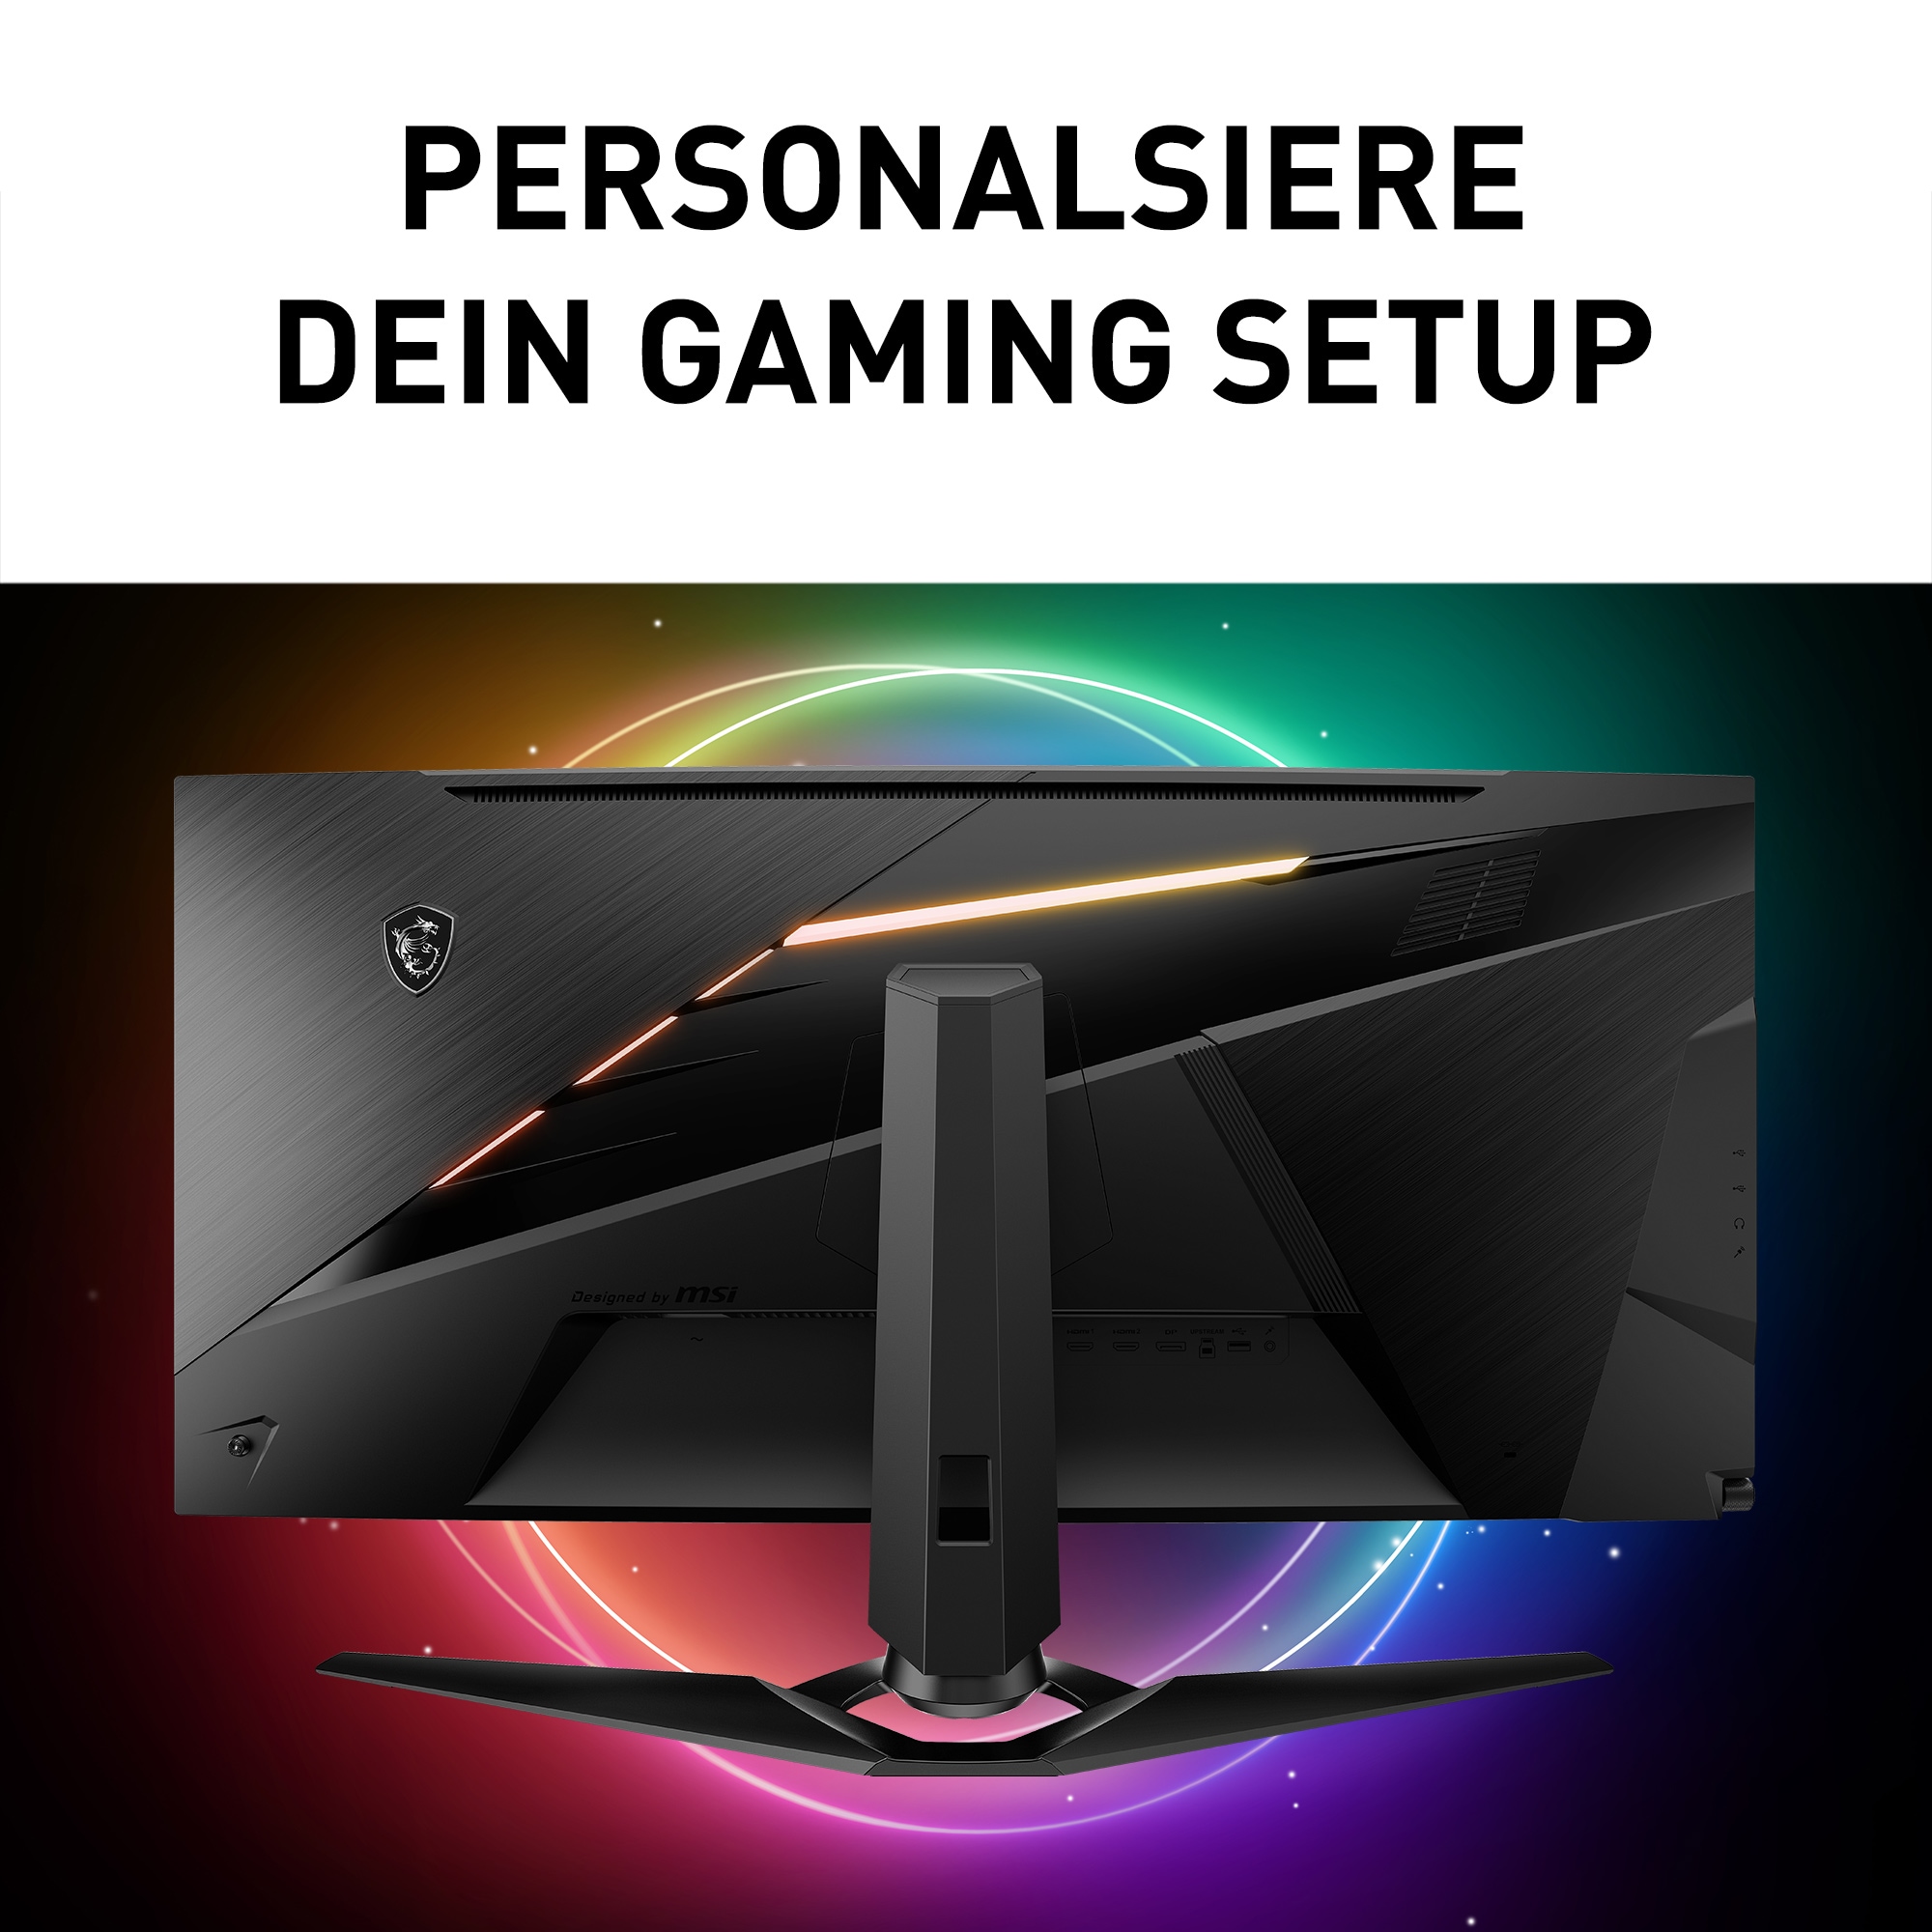 MSI Curved-Gaming-LED-Monitor »Optix MEG381CQRDE Plus«, 95,25 cm/37,5 Zoll, 3840 x 1600 px, UWQHD+, 1 ms Reaktionszeit, 175 Hz, G-Sync Ultimate, Rapid IPS, HDR600, 21:9 Ultrawide